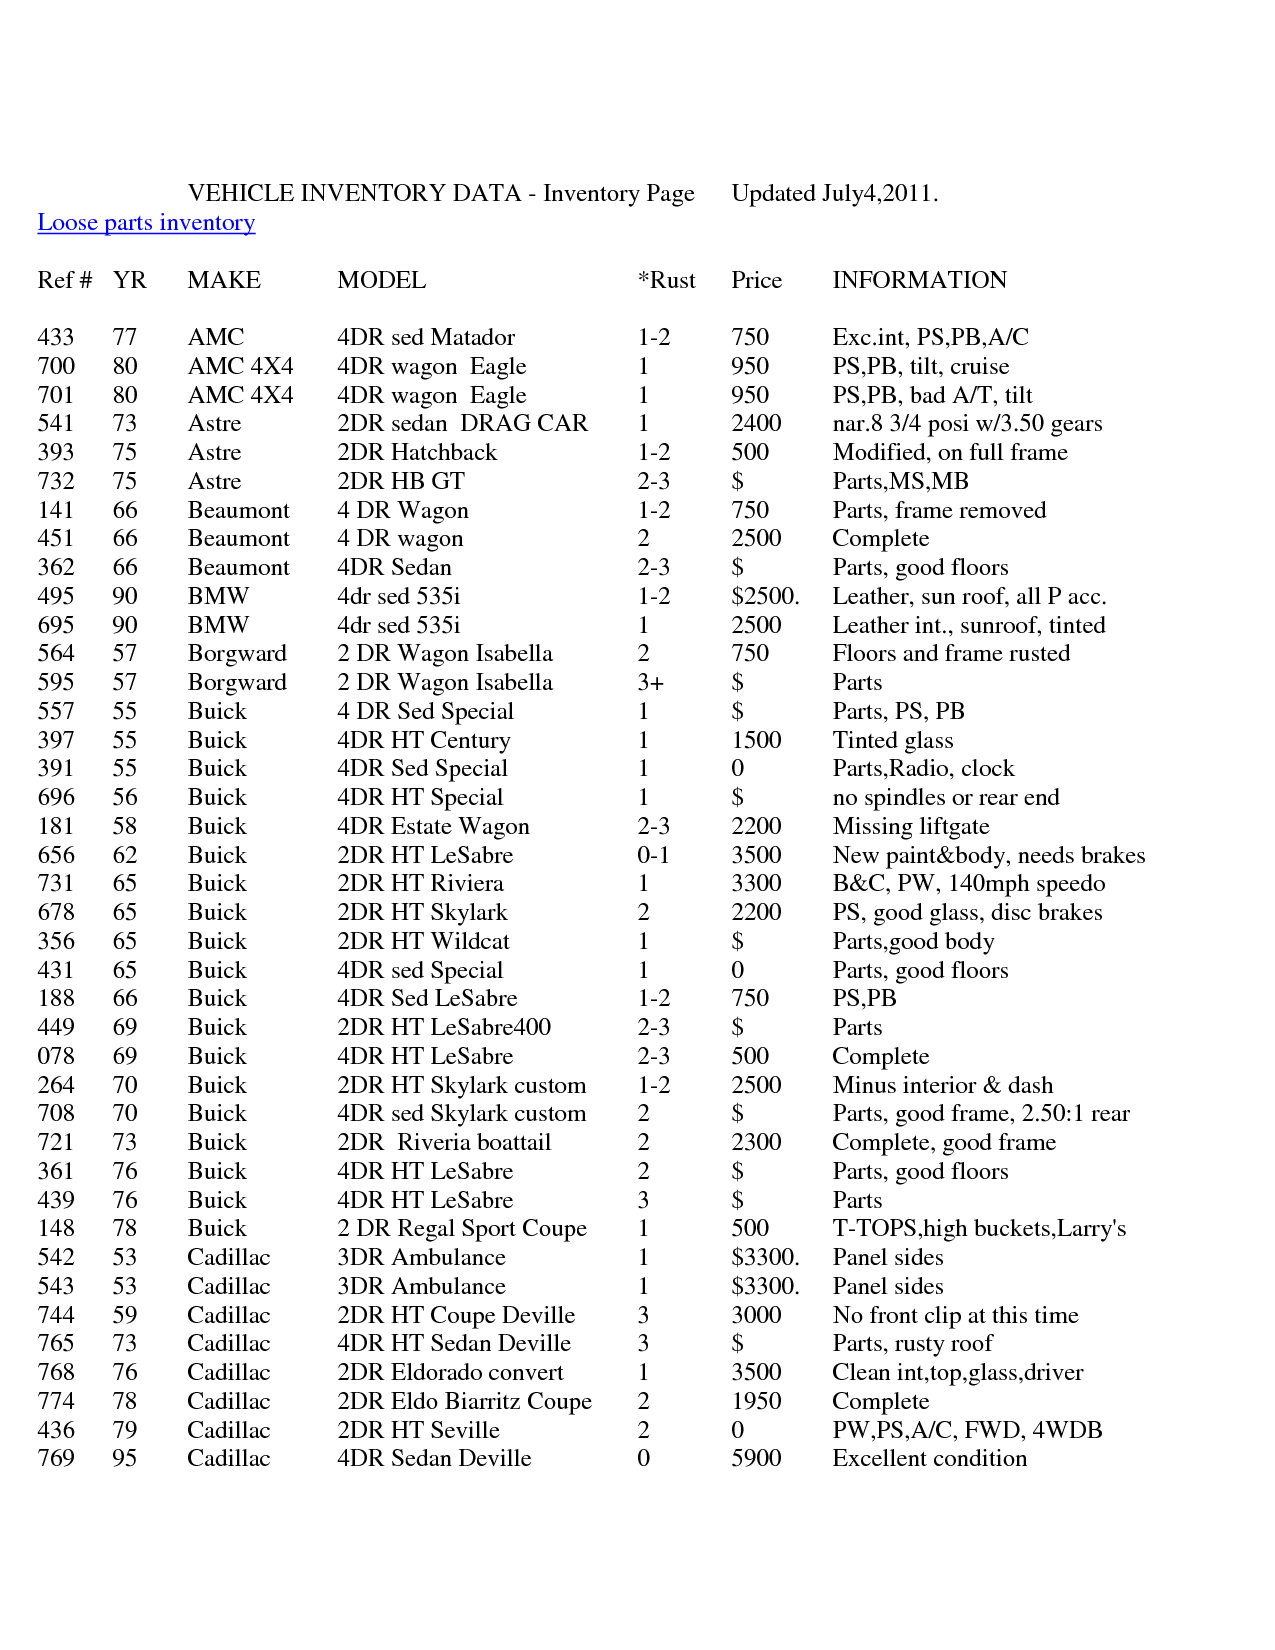 VEHICLE INVENTORY DATA - Inventory Page Updated August 31, 2005